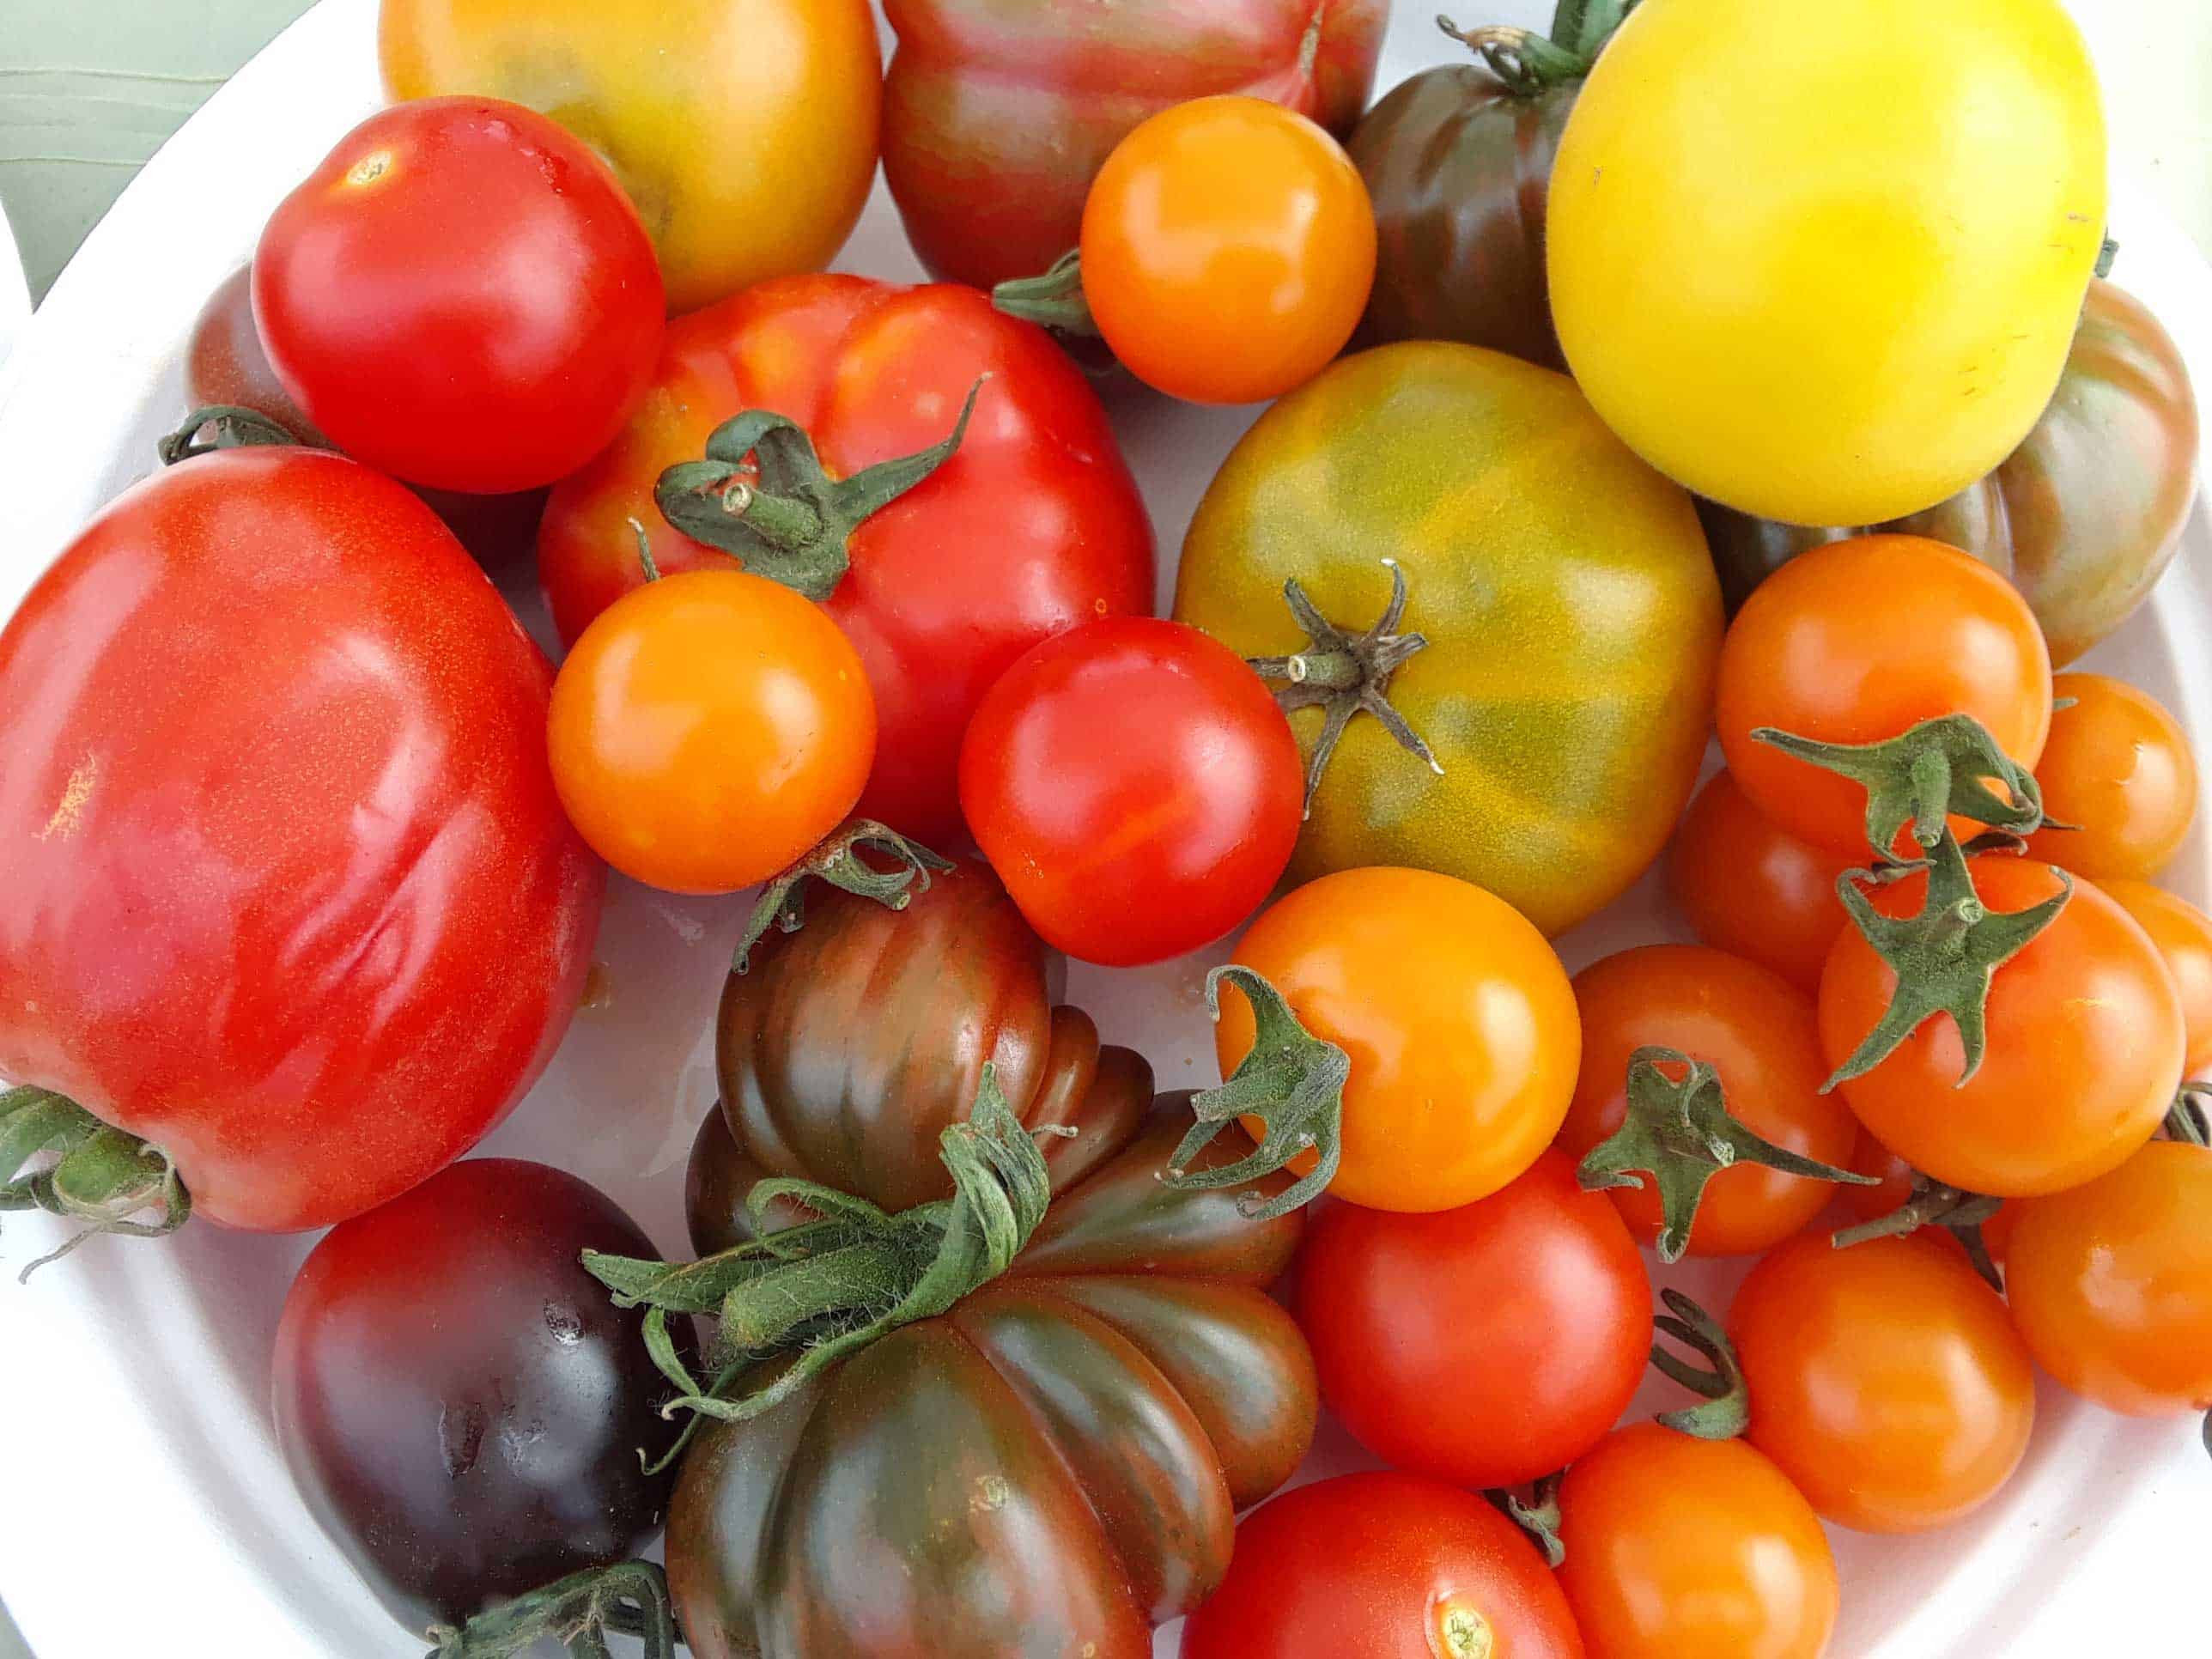 Check Out These Frost-Resistant Tomatoes! Gardeners Experiment to Find New Varieties for Your Meals